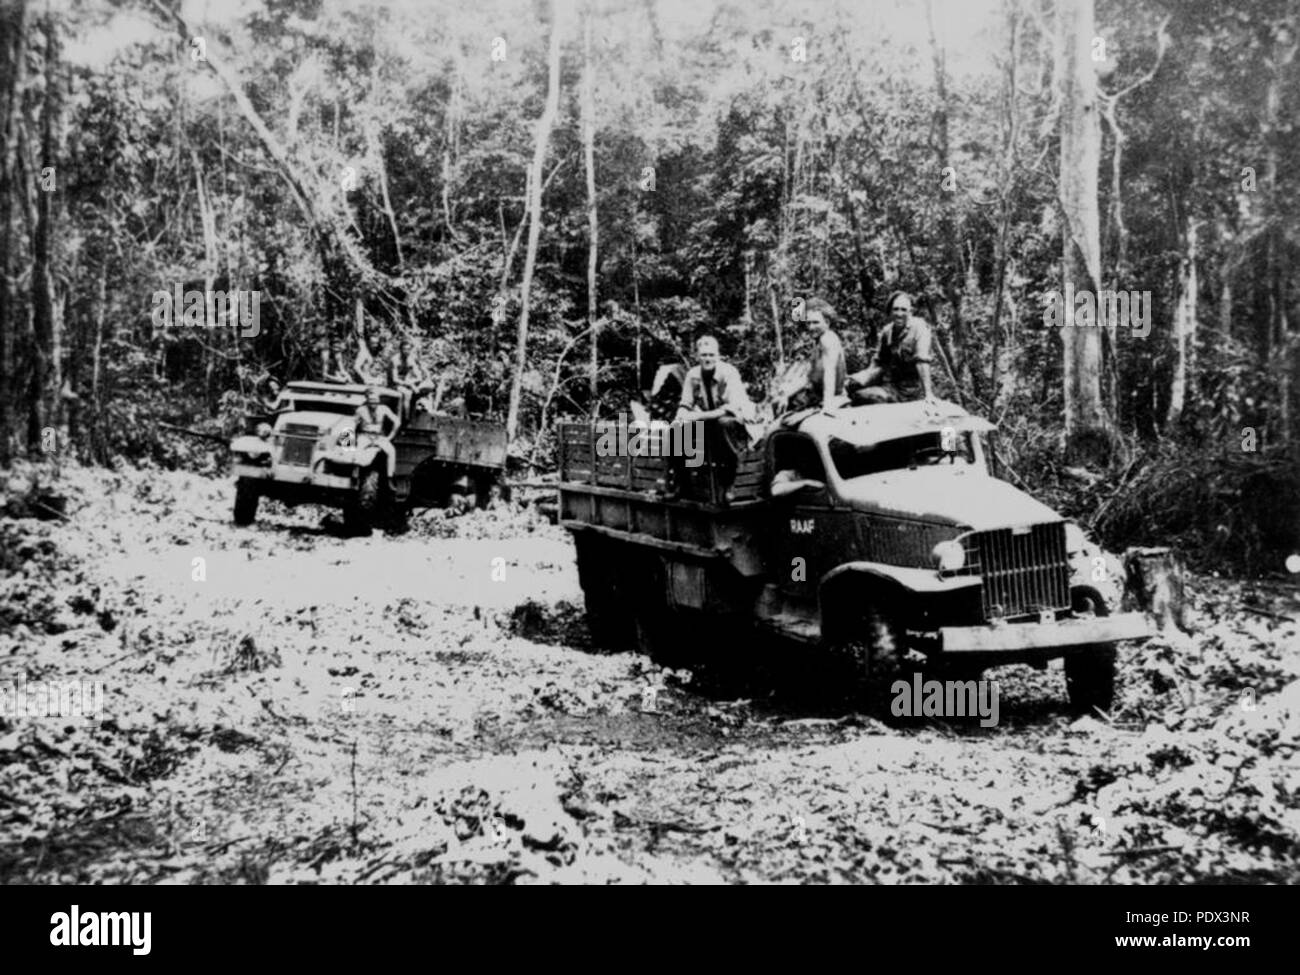 248 StateLibQld 1 196047 Army trucks on patrol in the jungles of New Guinea during World War II, ca. 1944 Stock Photo